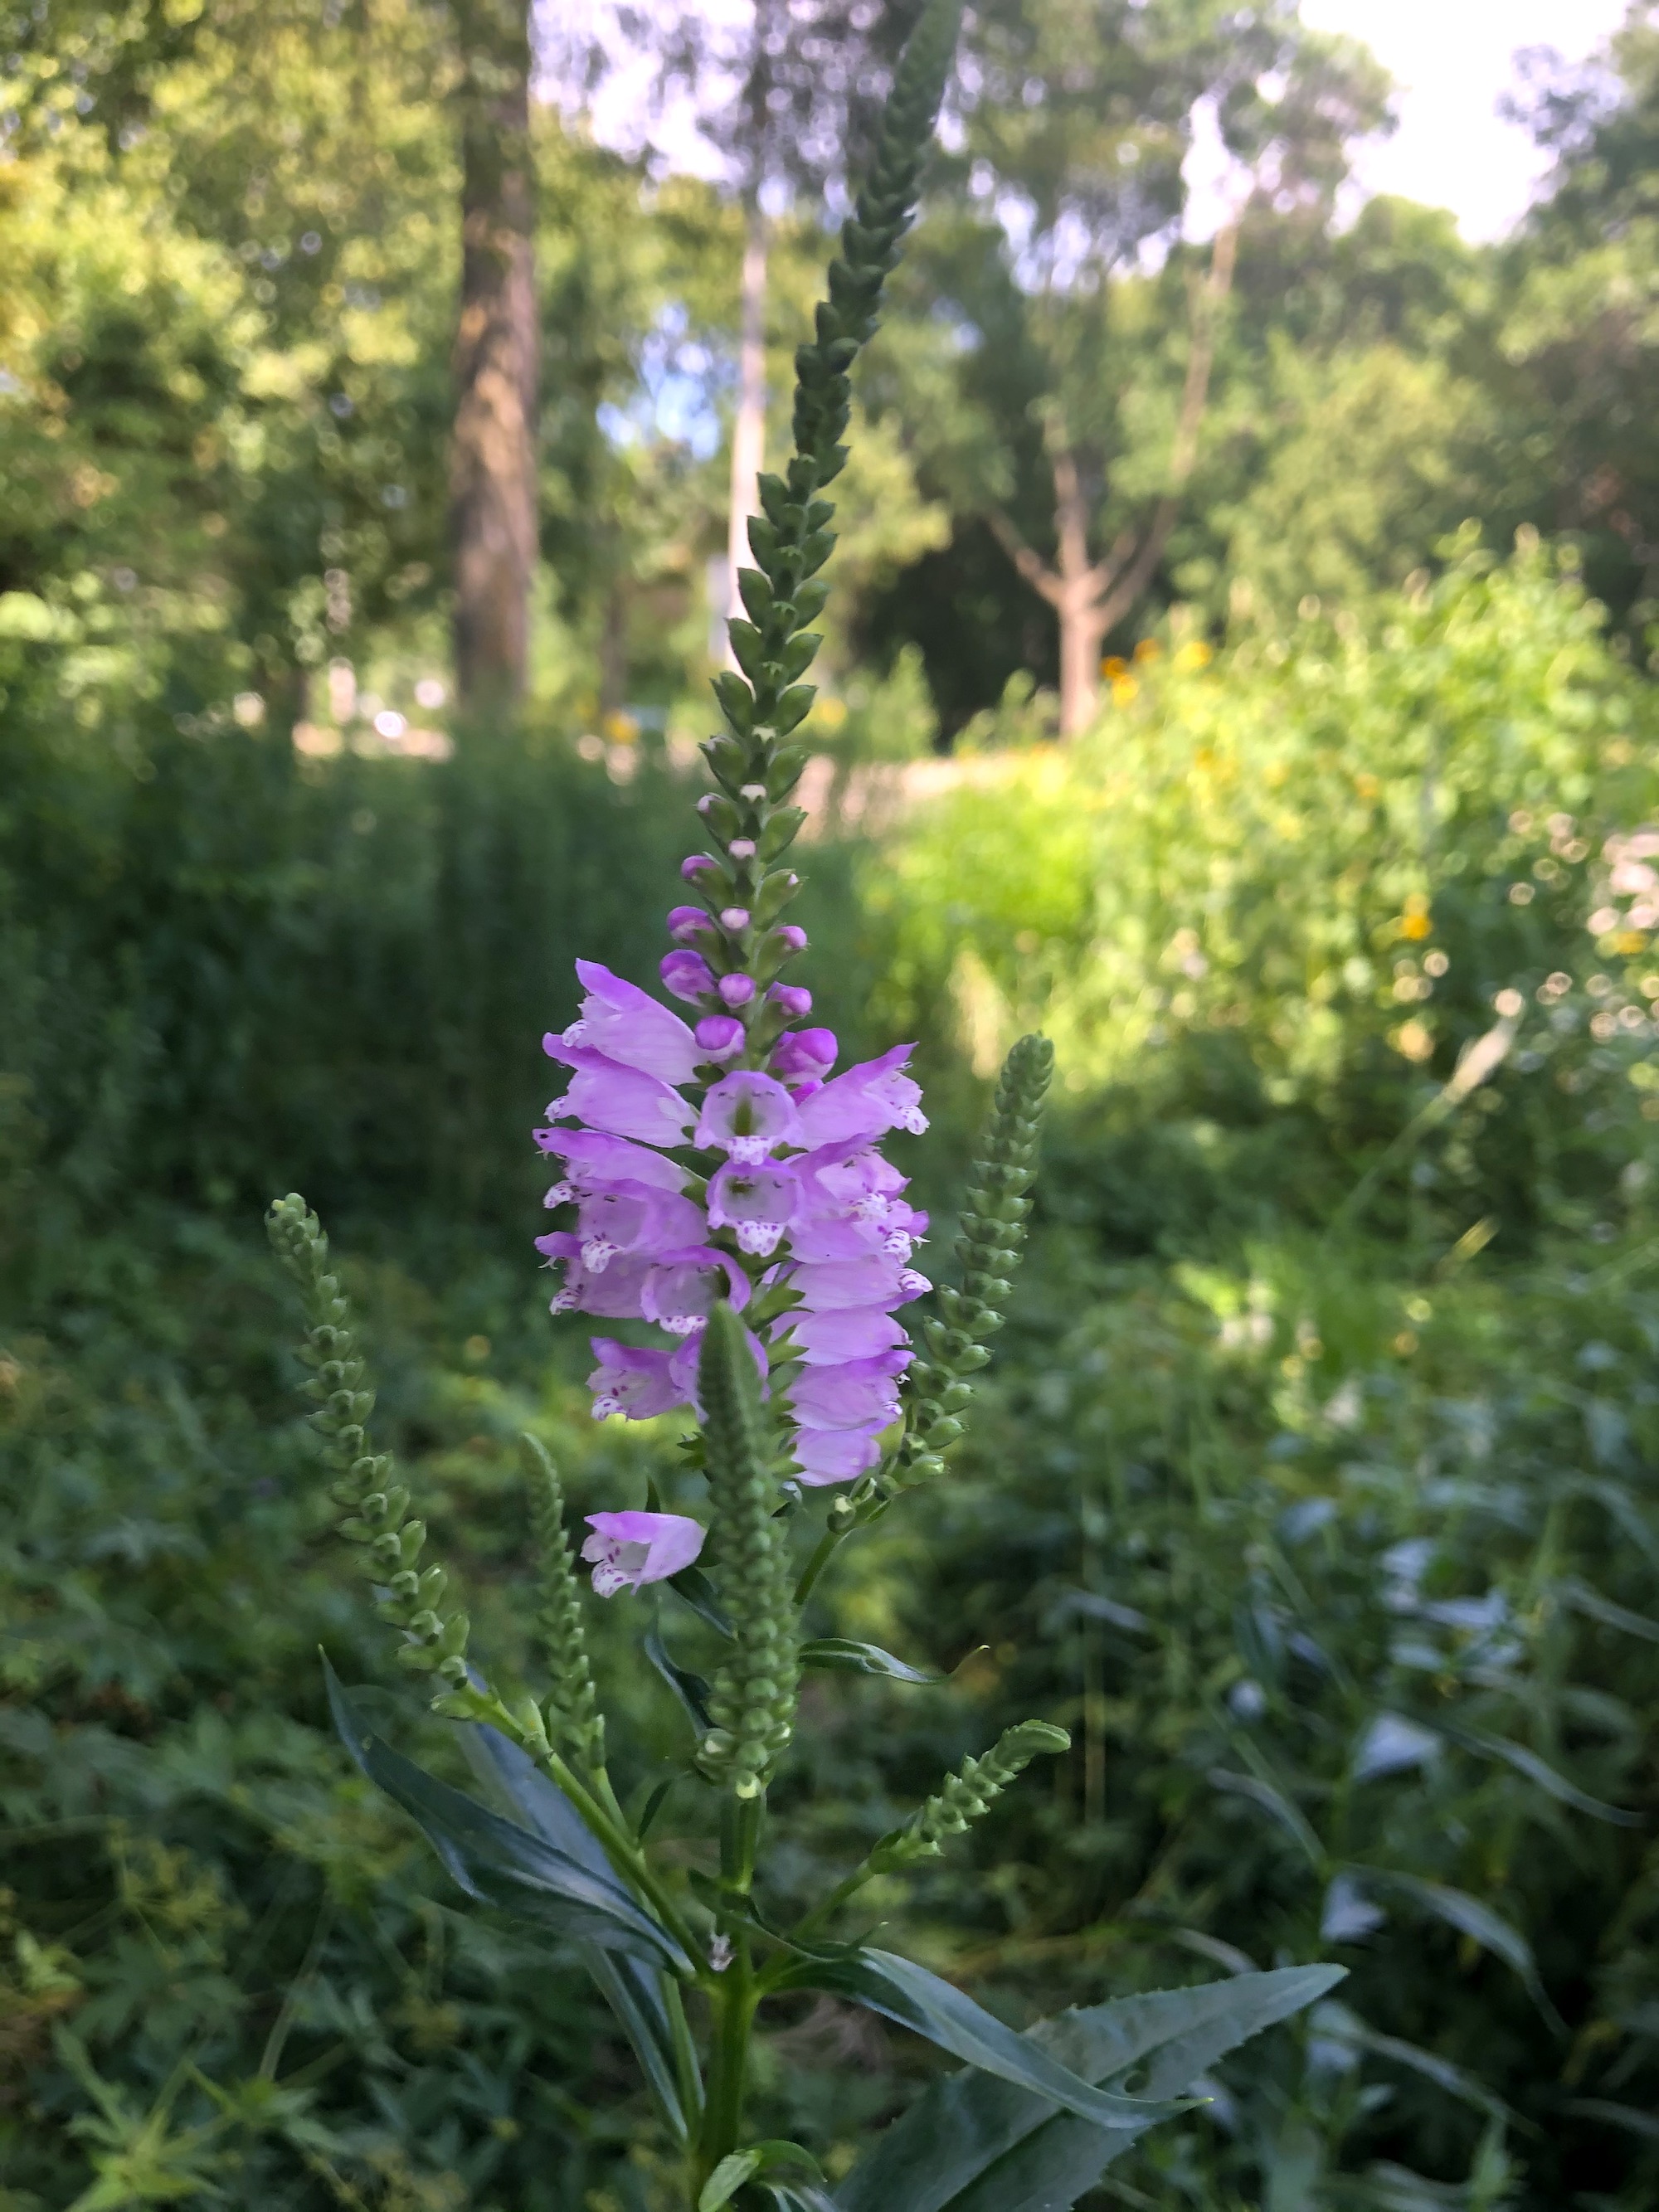 Obedient Plant in Thoreau Rain Garden in Madison, Wisconsin on July 24, 2020.